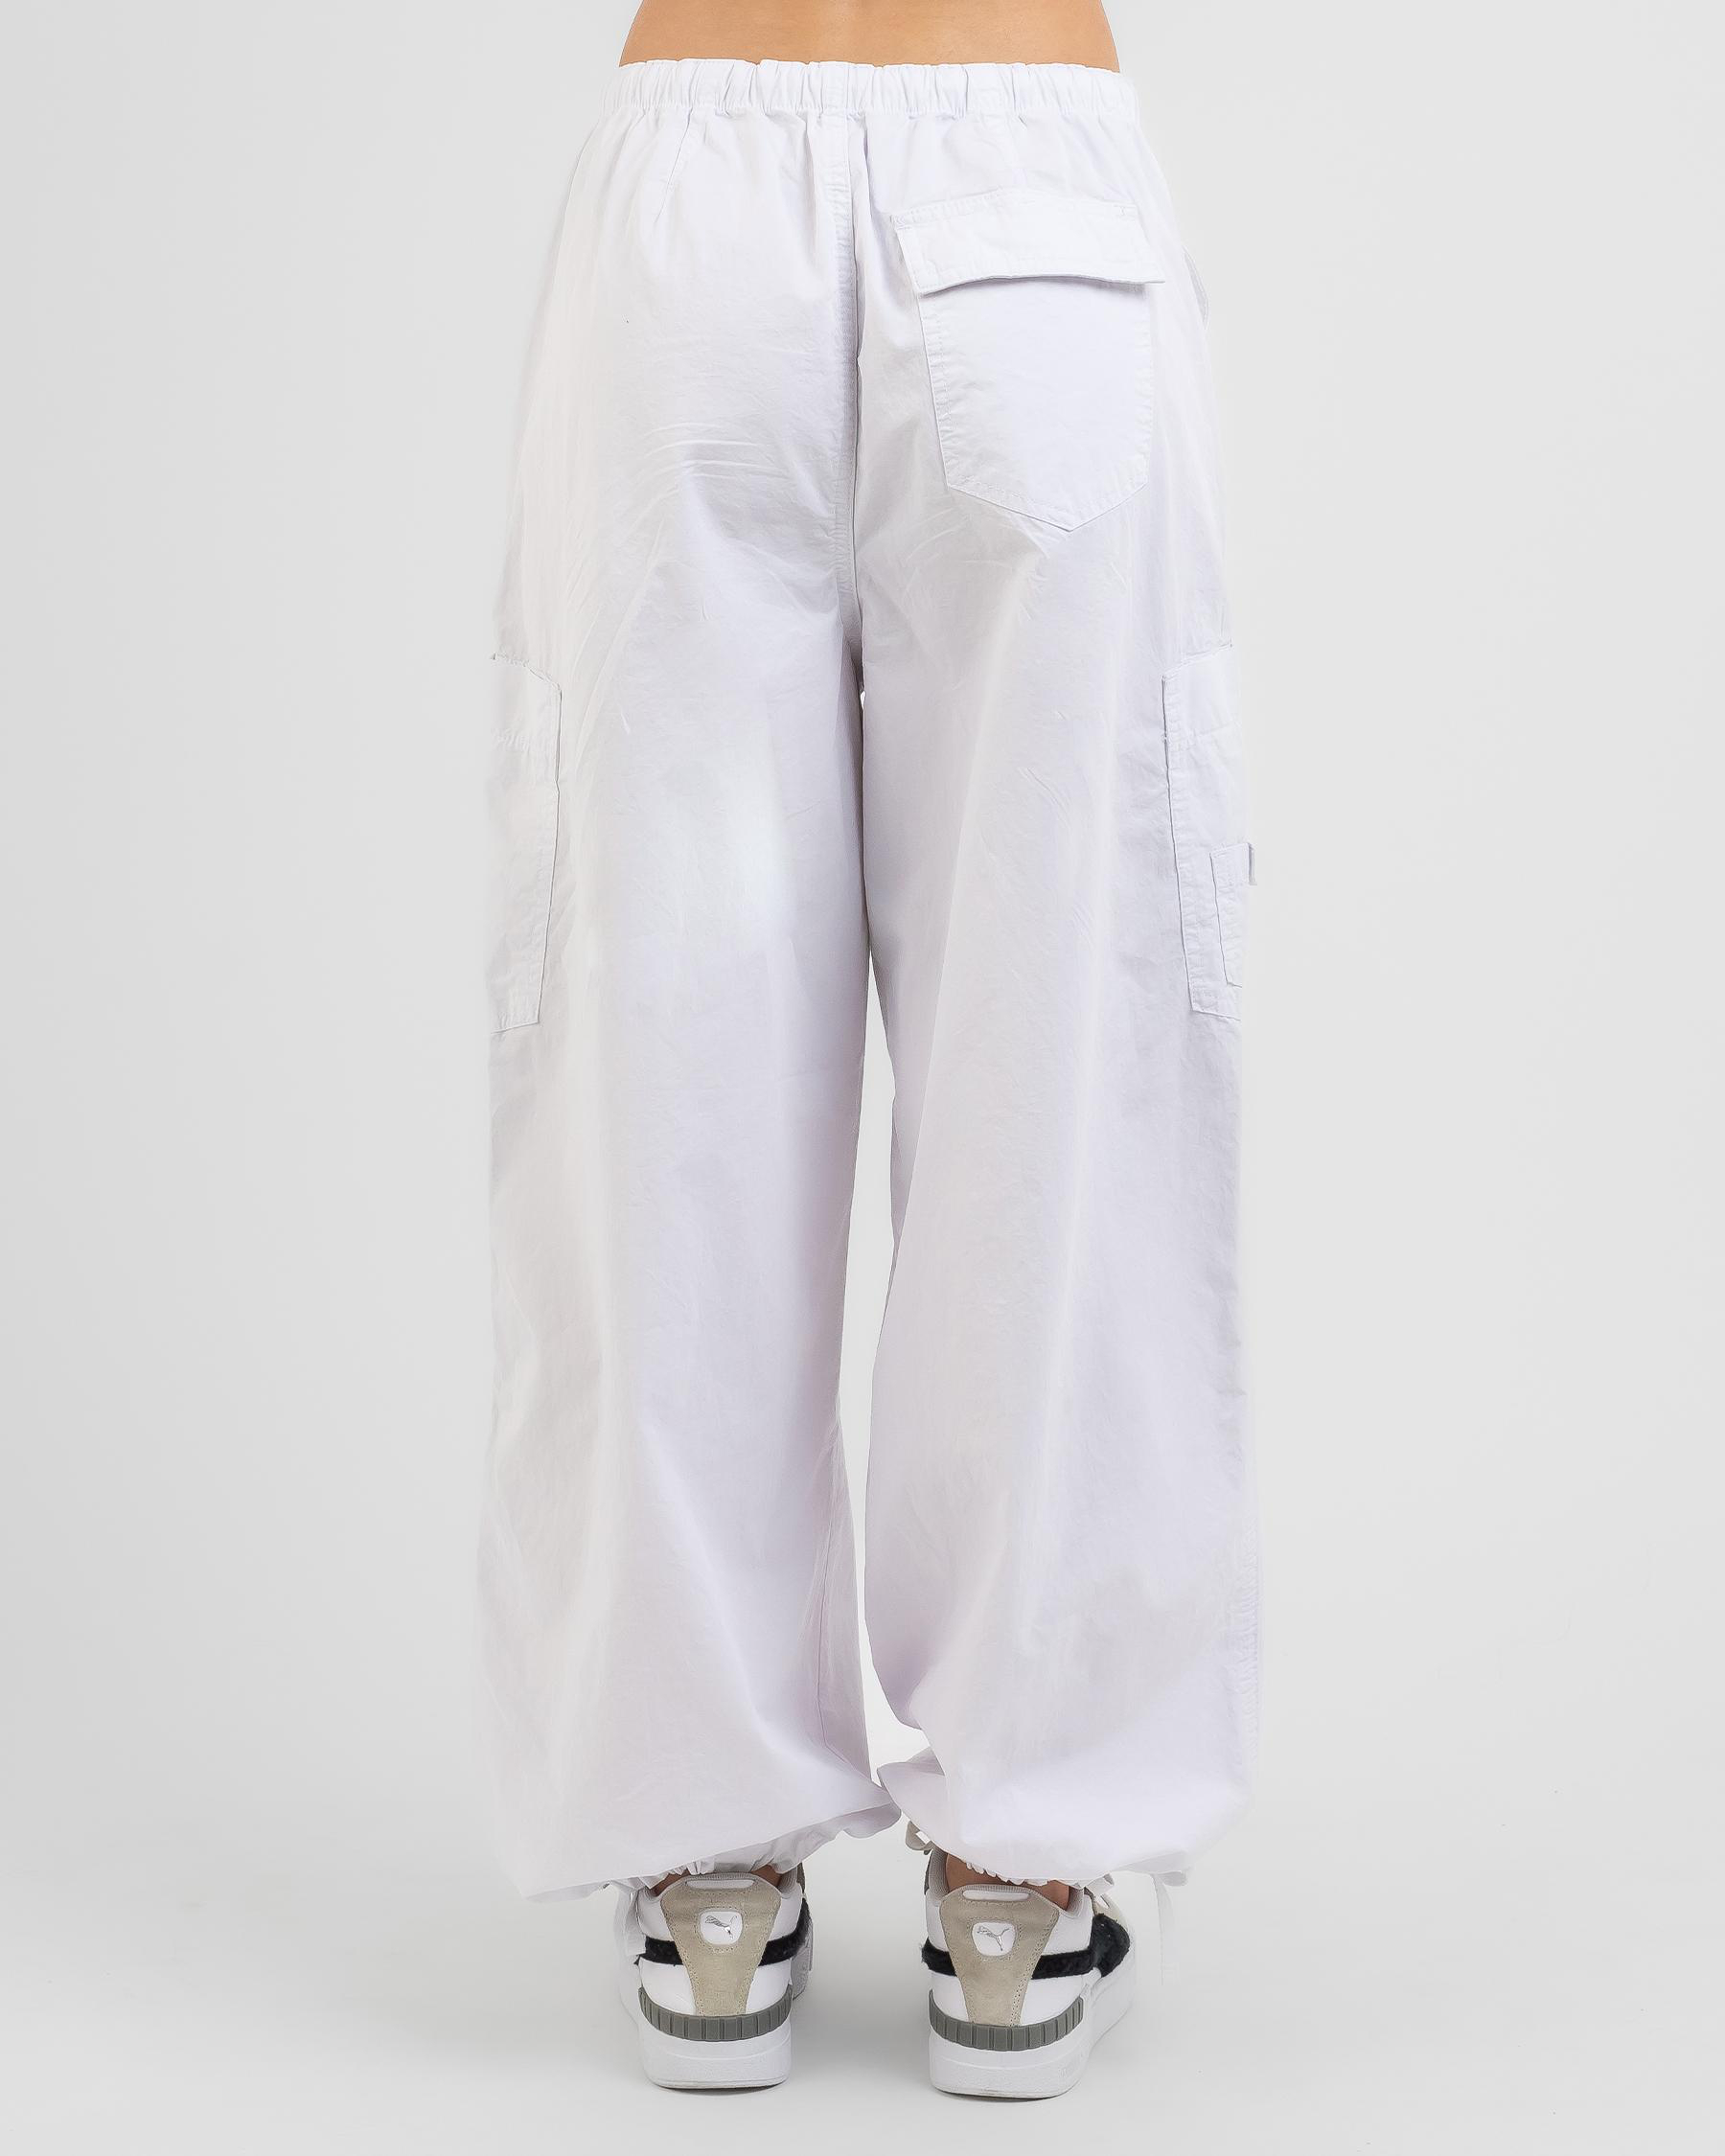 Ava And Ever Hawk Pants In White - Fast Shipping & Easy Returns - City ...